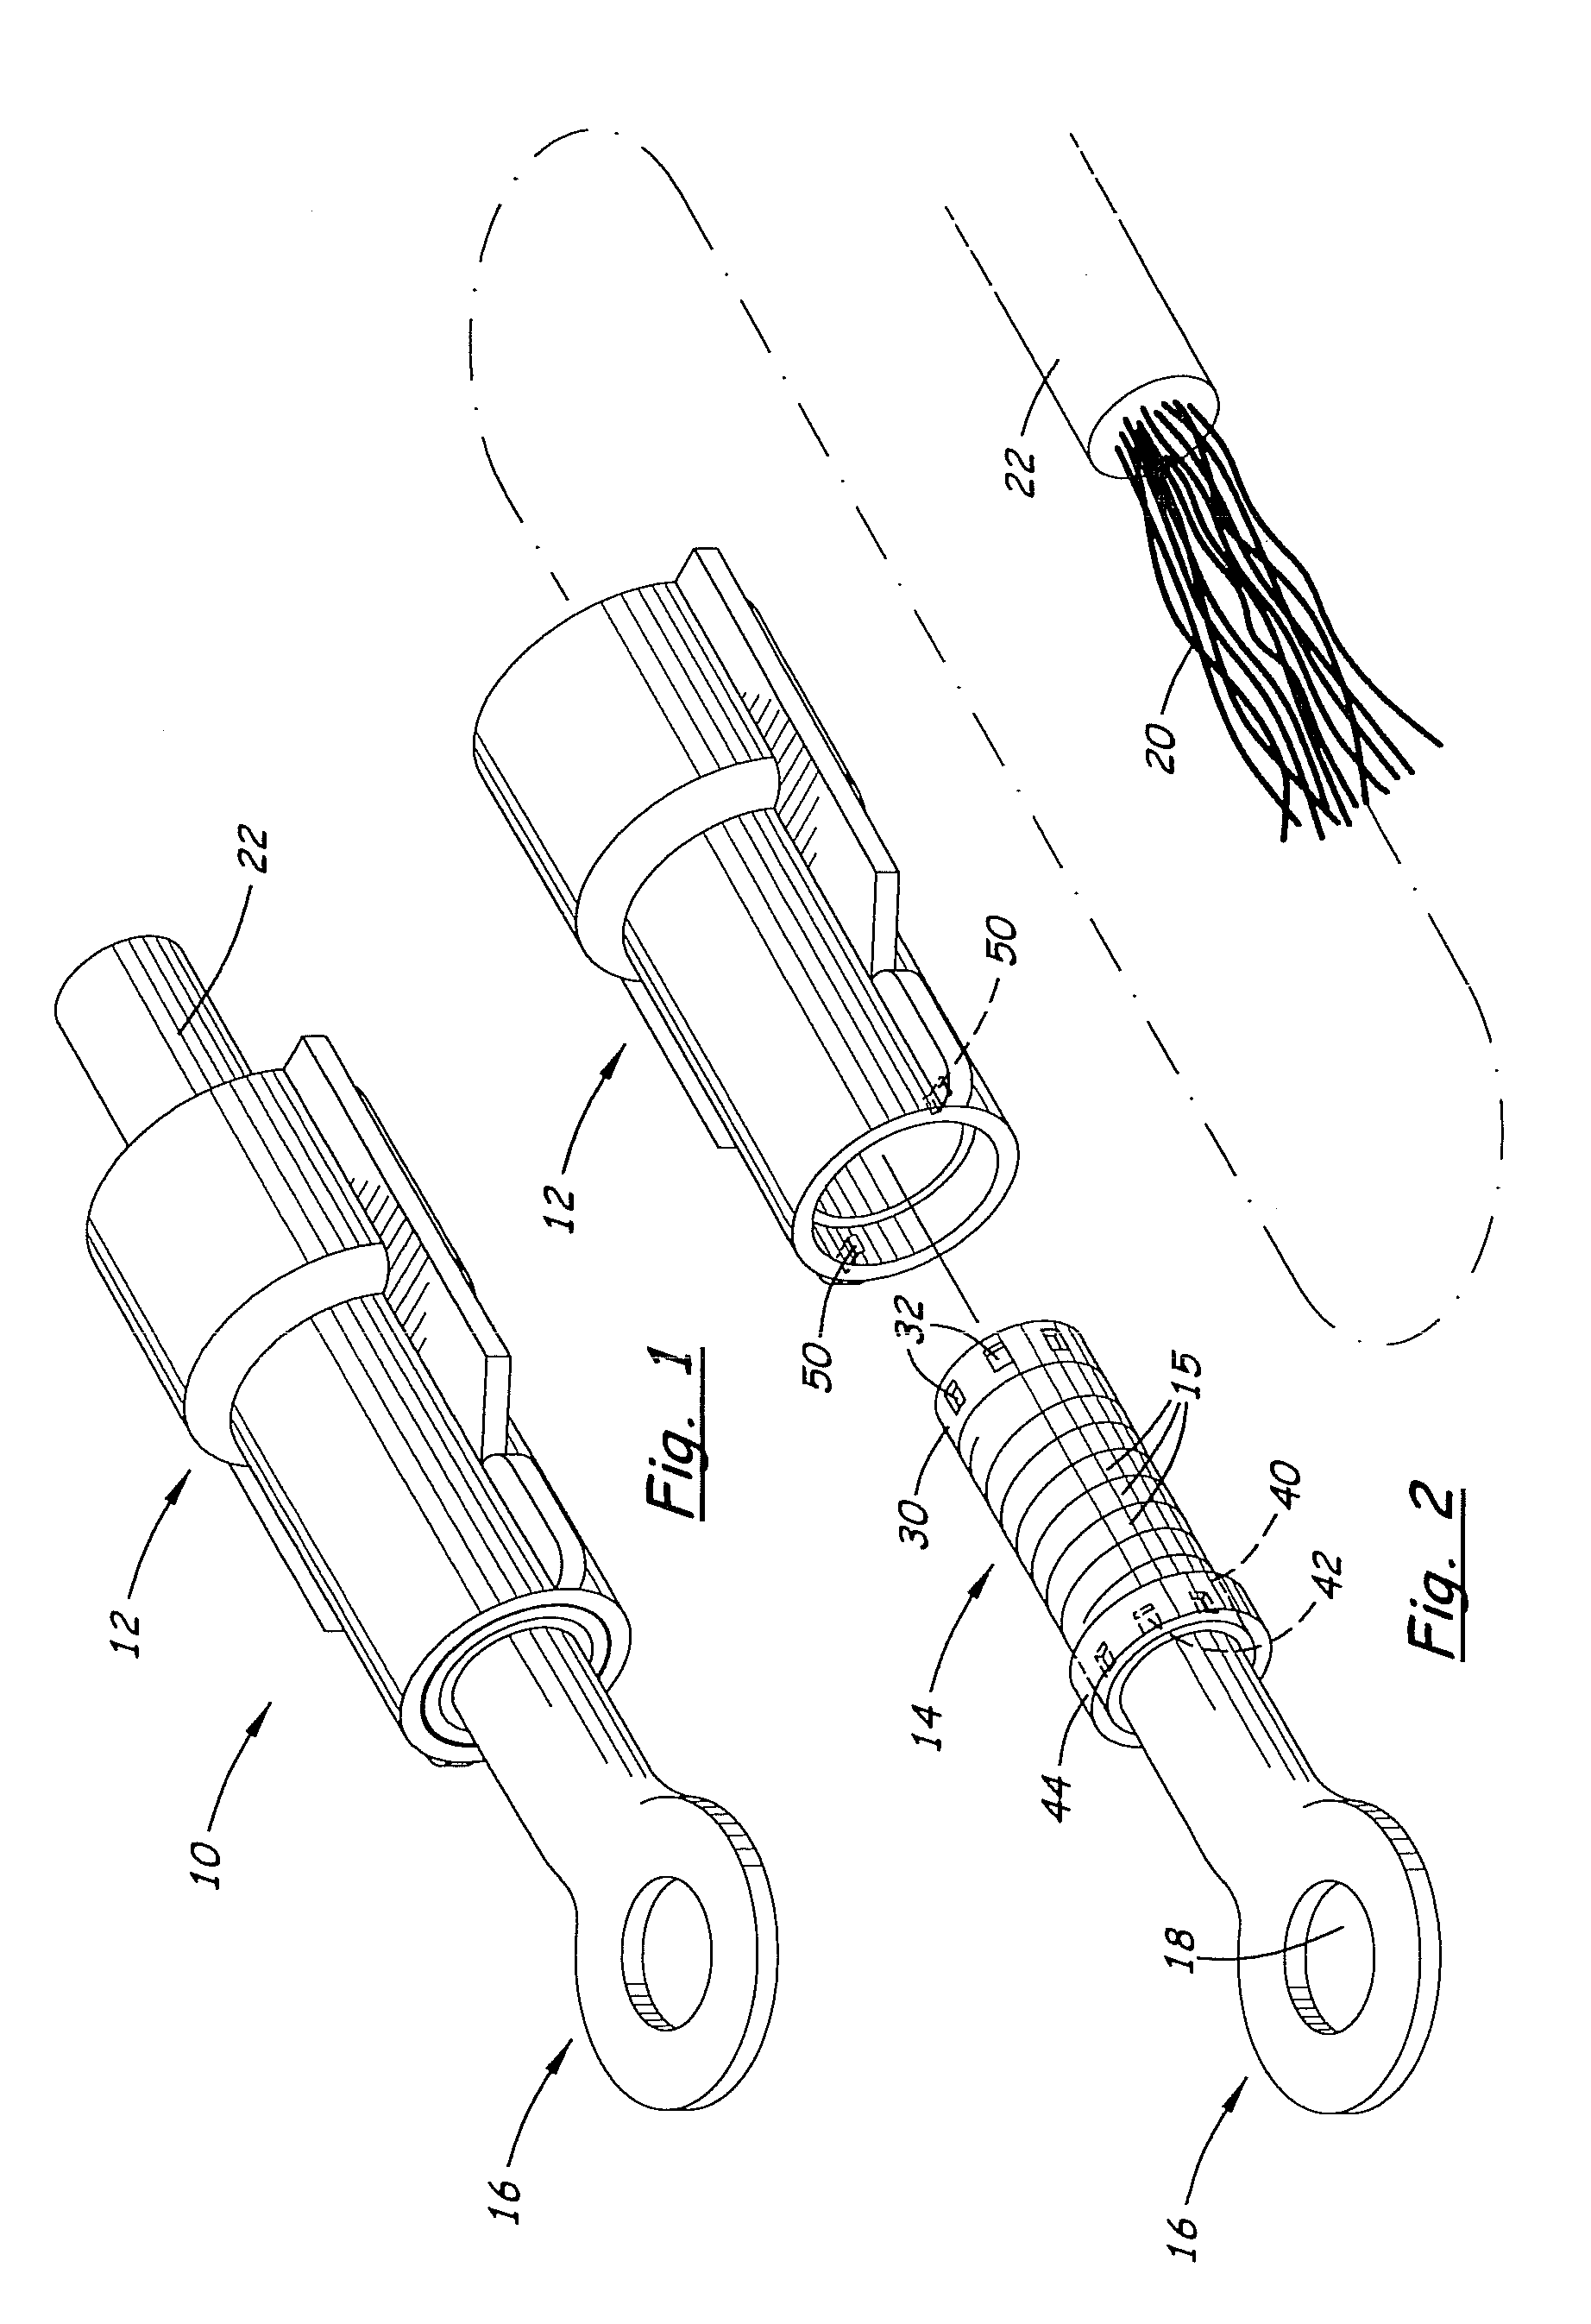 Electrical connectors and methods of manufacturing and using same